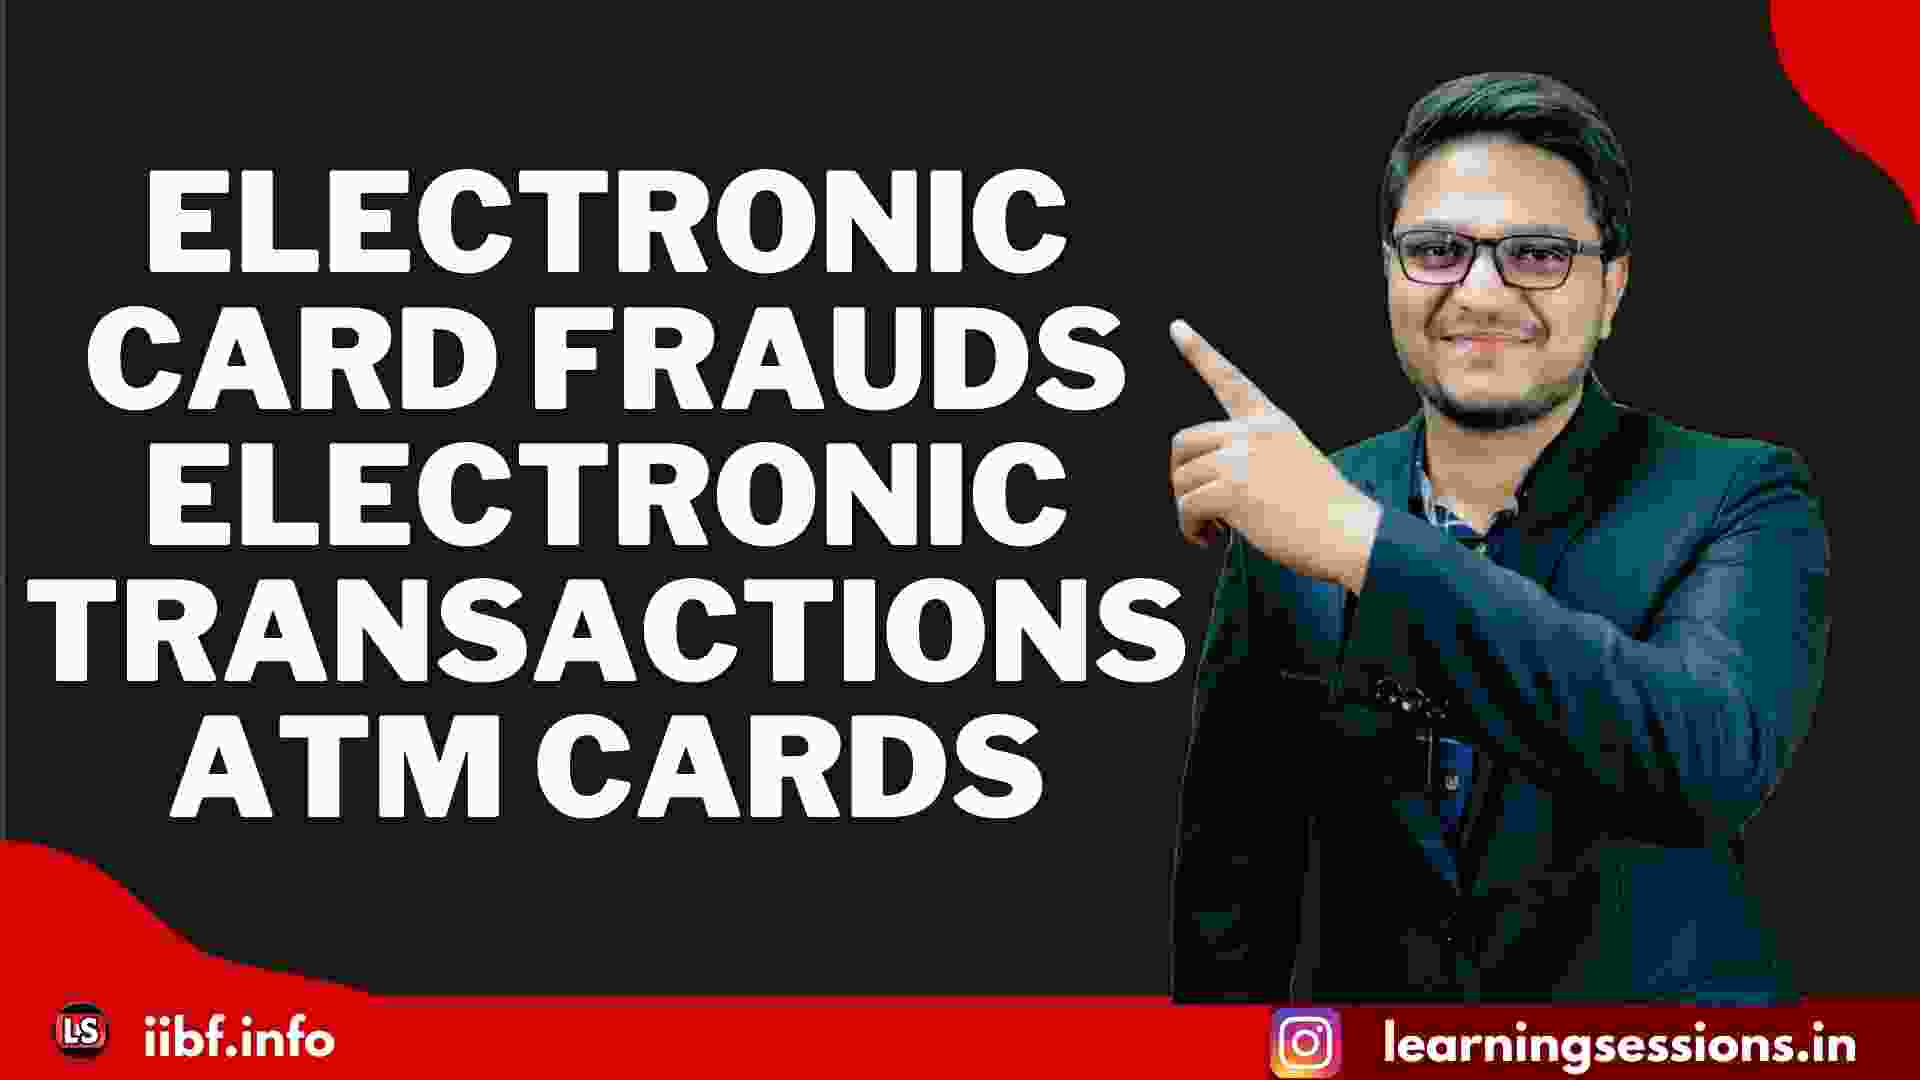 ELECTRONIC CARD FRAUDS | ELECTRONIC TRANSACTIONS | ATM CARDS